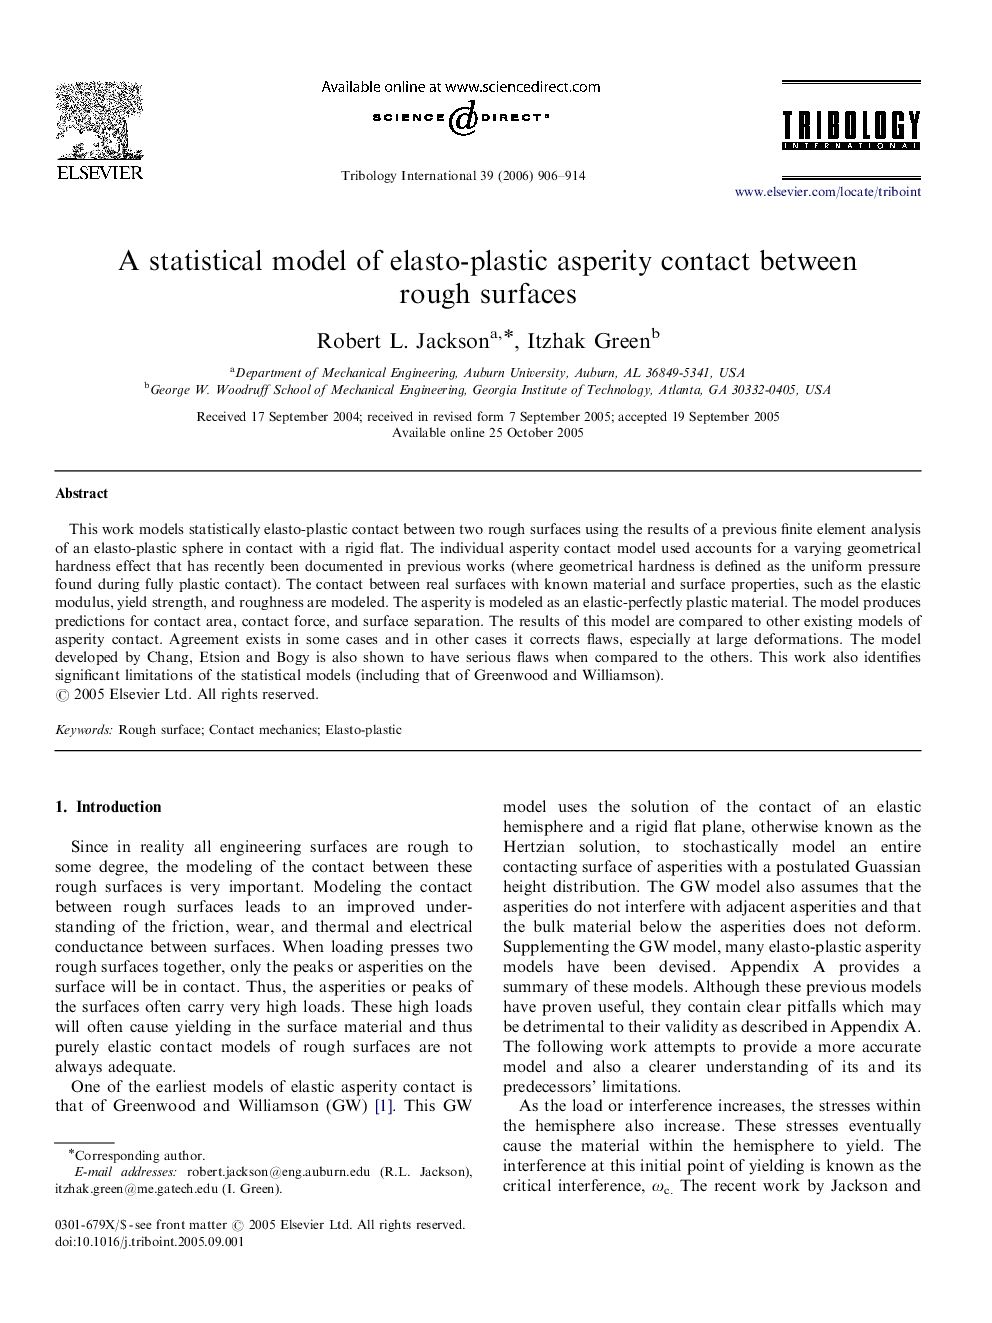 A statistical model of elasto-plastic asperity contact between rough surfaces